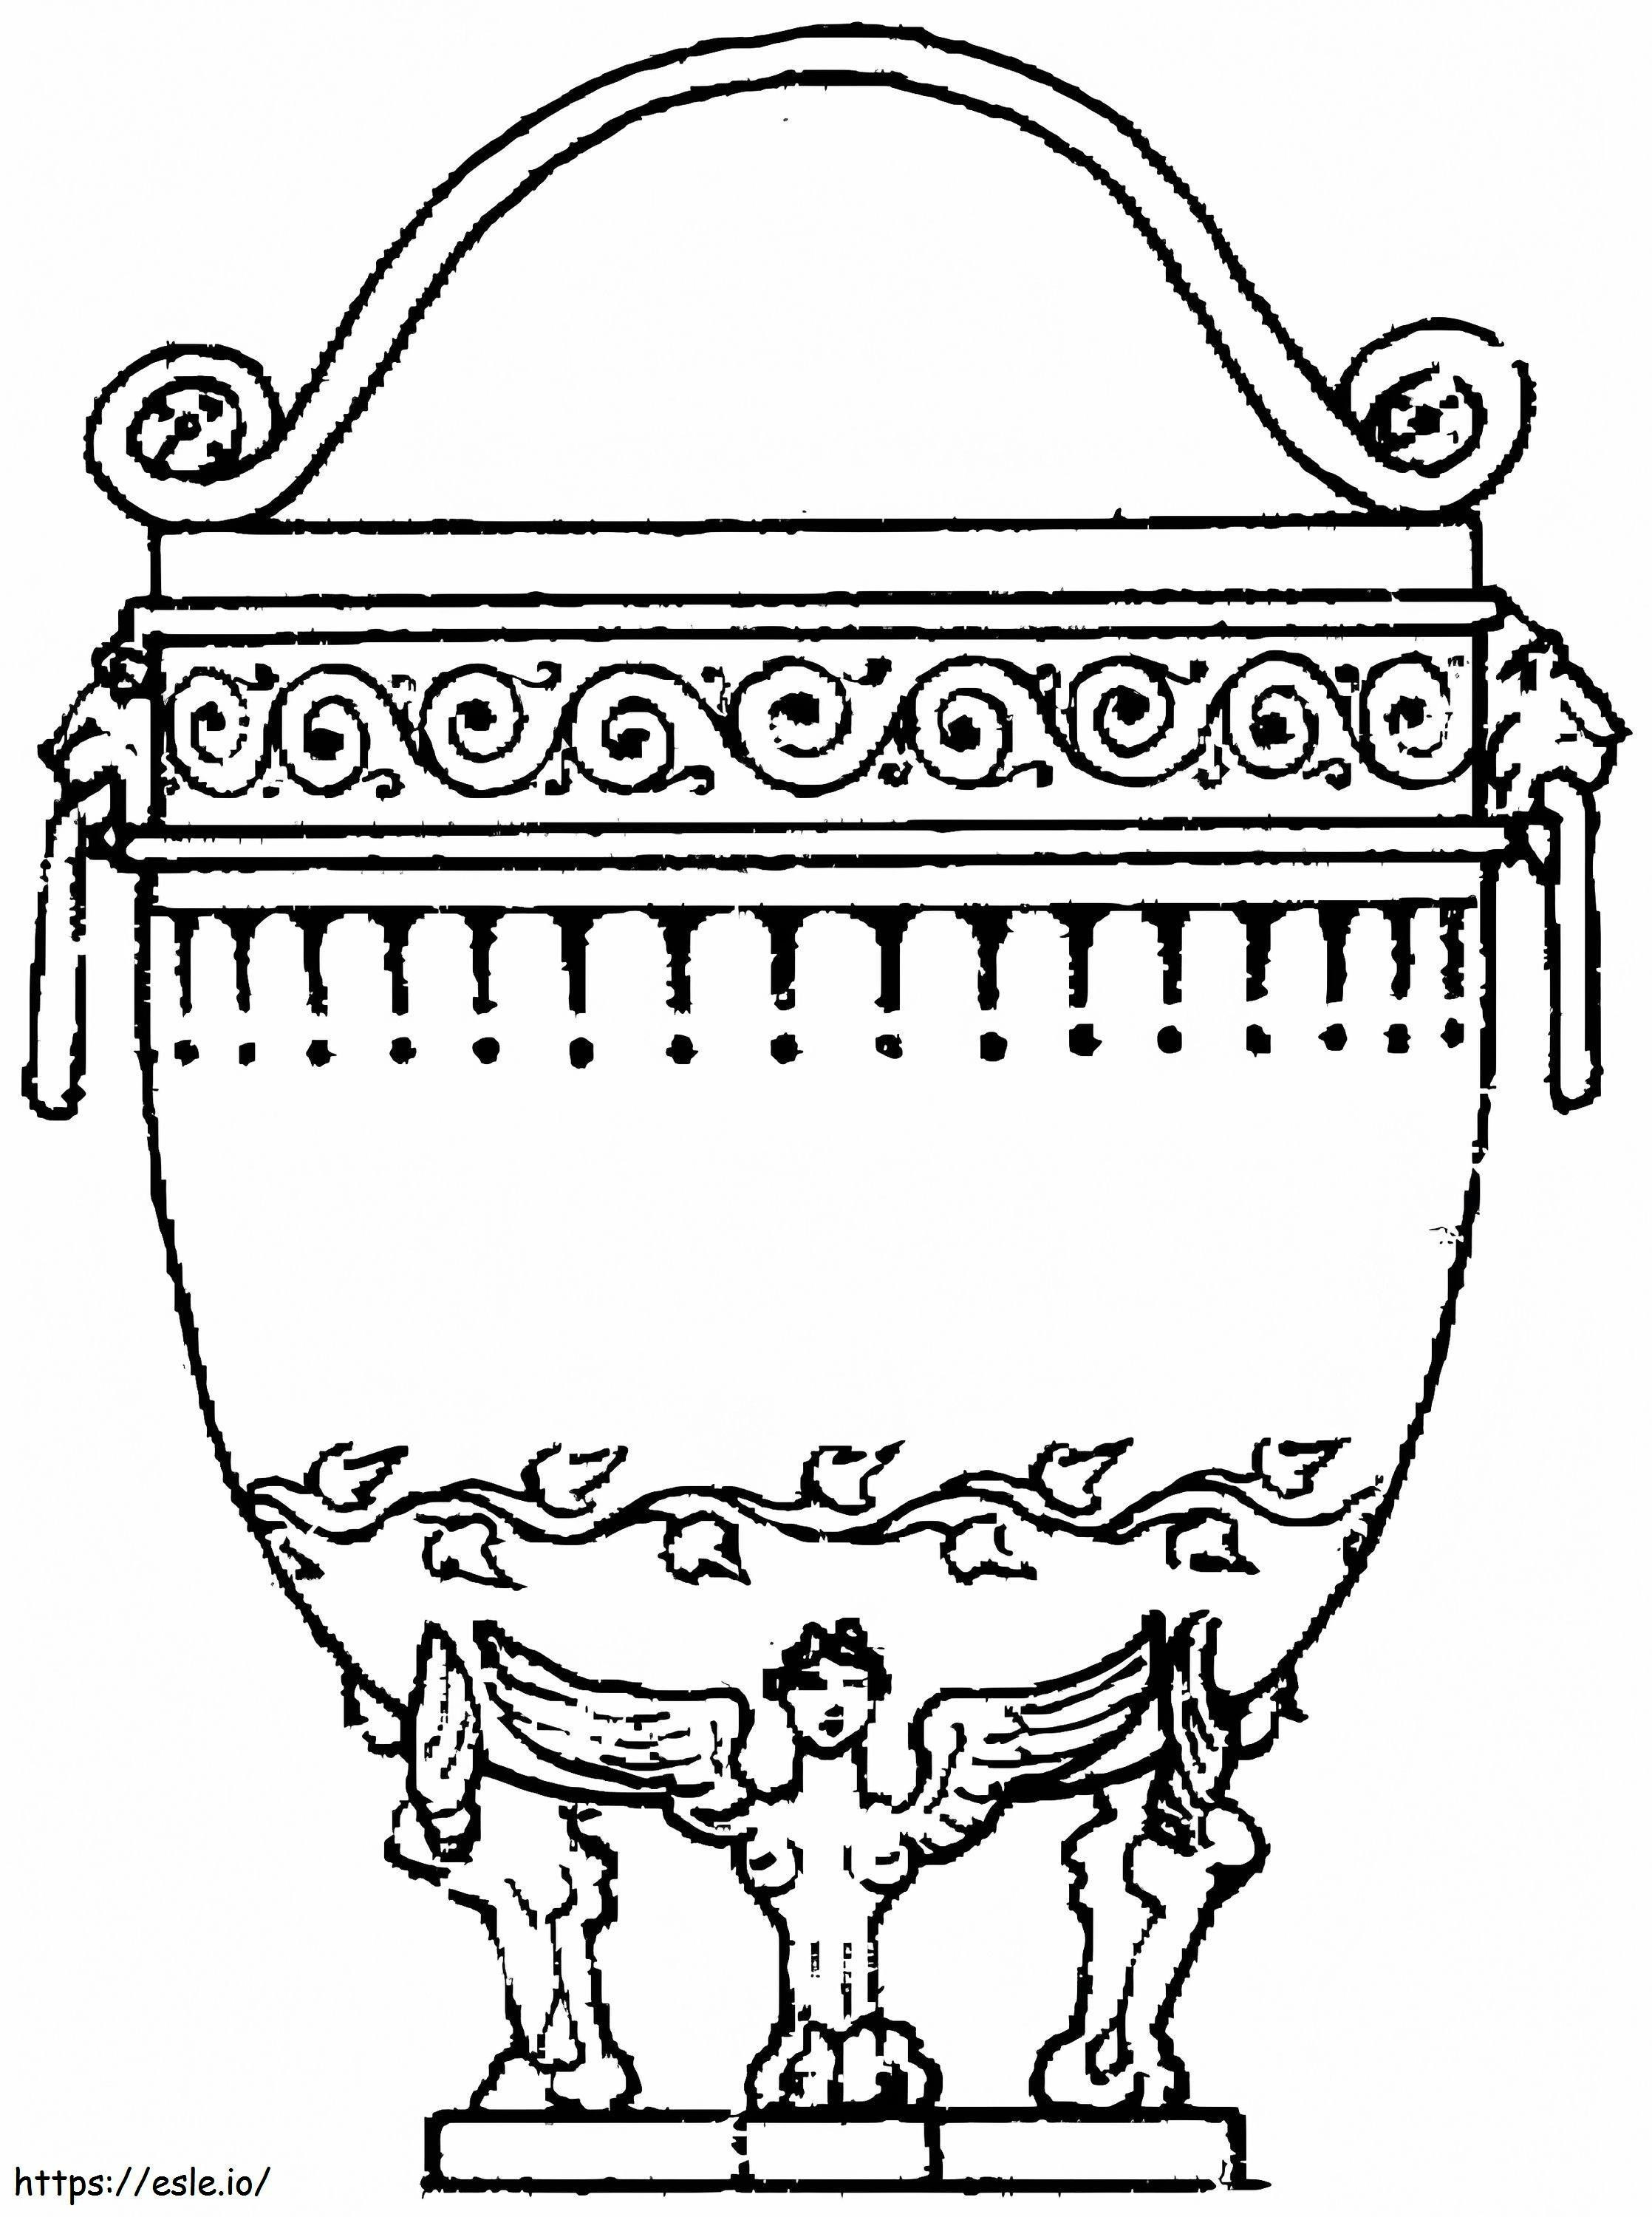 Ancient Vase 1 coloring page